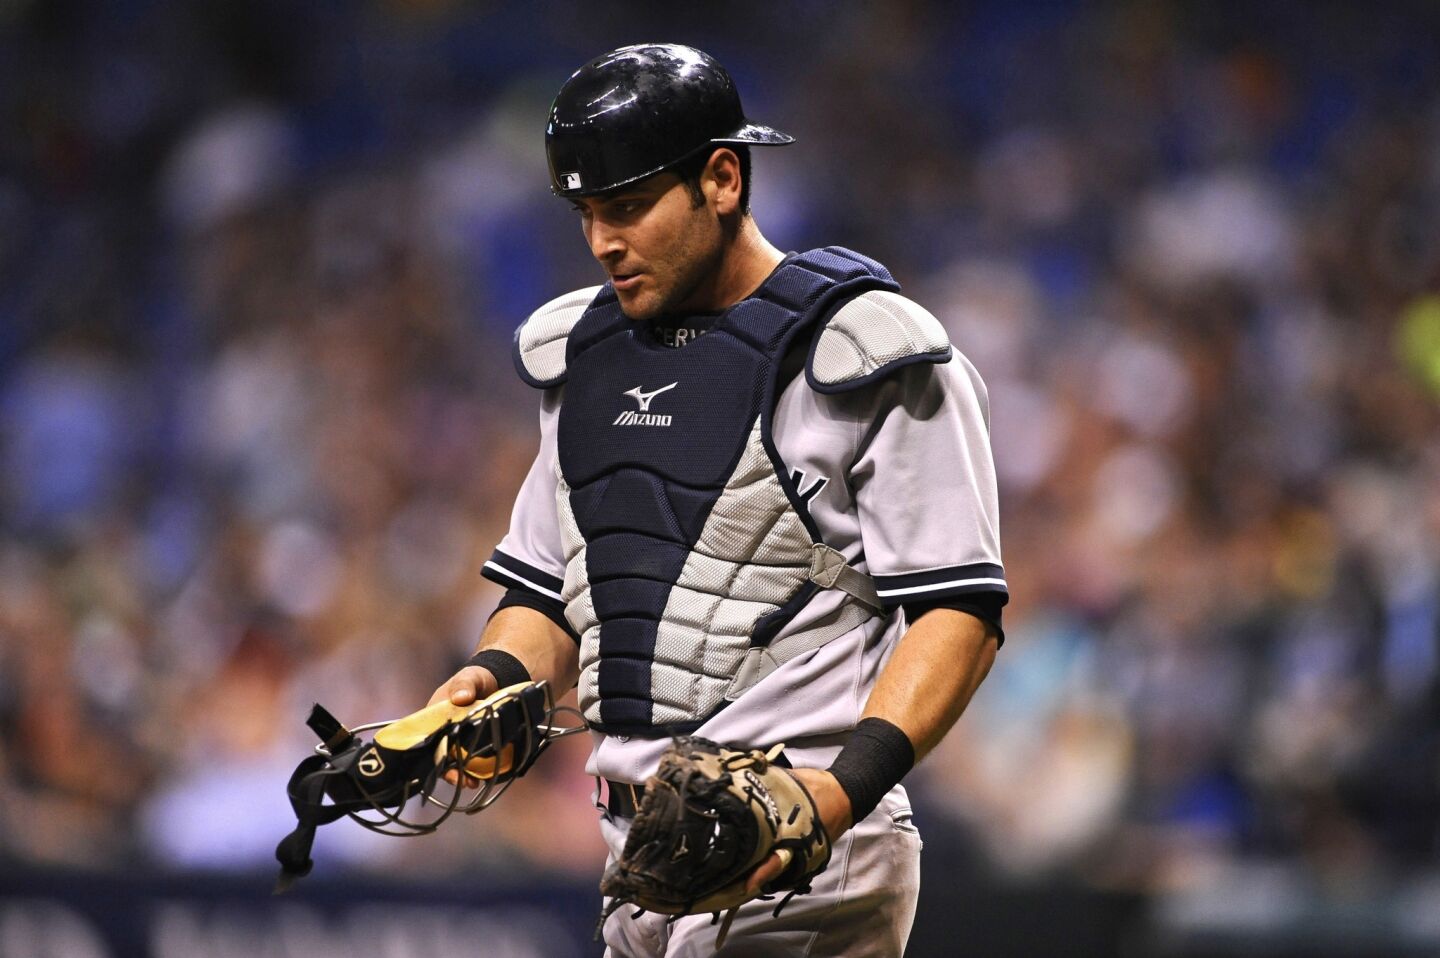 The New Yankees catcher, who has played parts of six seasons with the team but only 17 games this season because of injuries, was suspended 50 games by Major League Baseball for using performance-enhancing drugs.